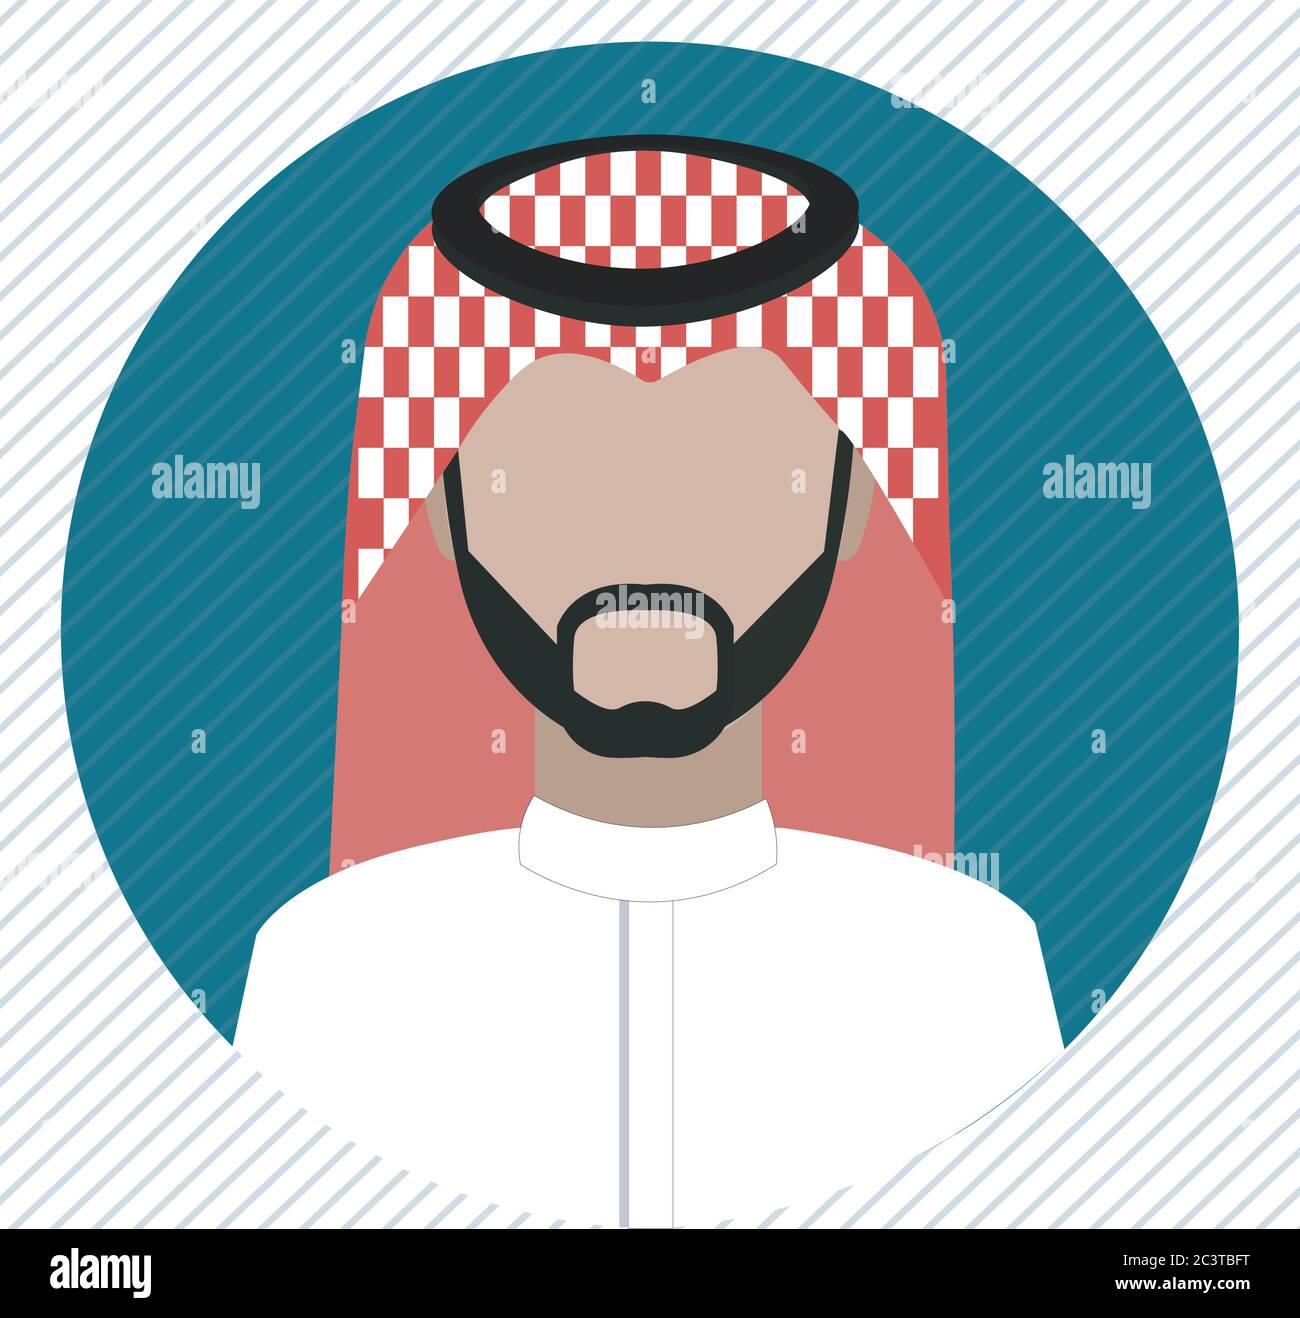 A Saudi man icon wearing shemagh and a thobe Stock Vector